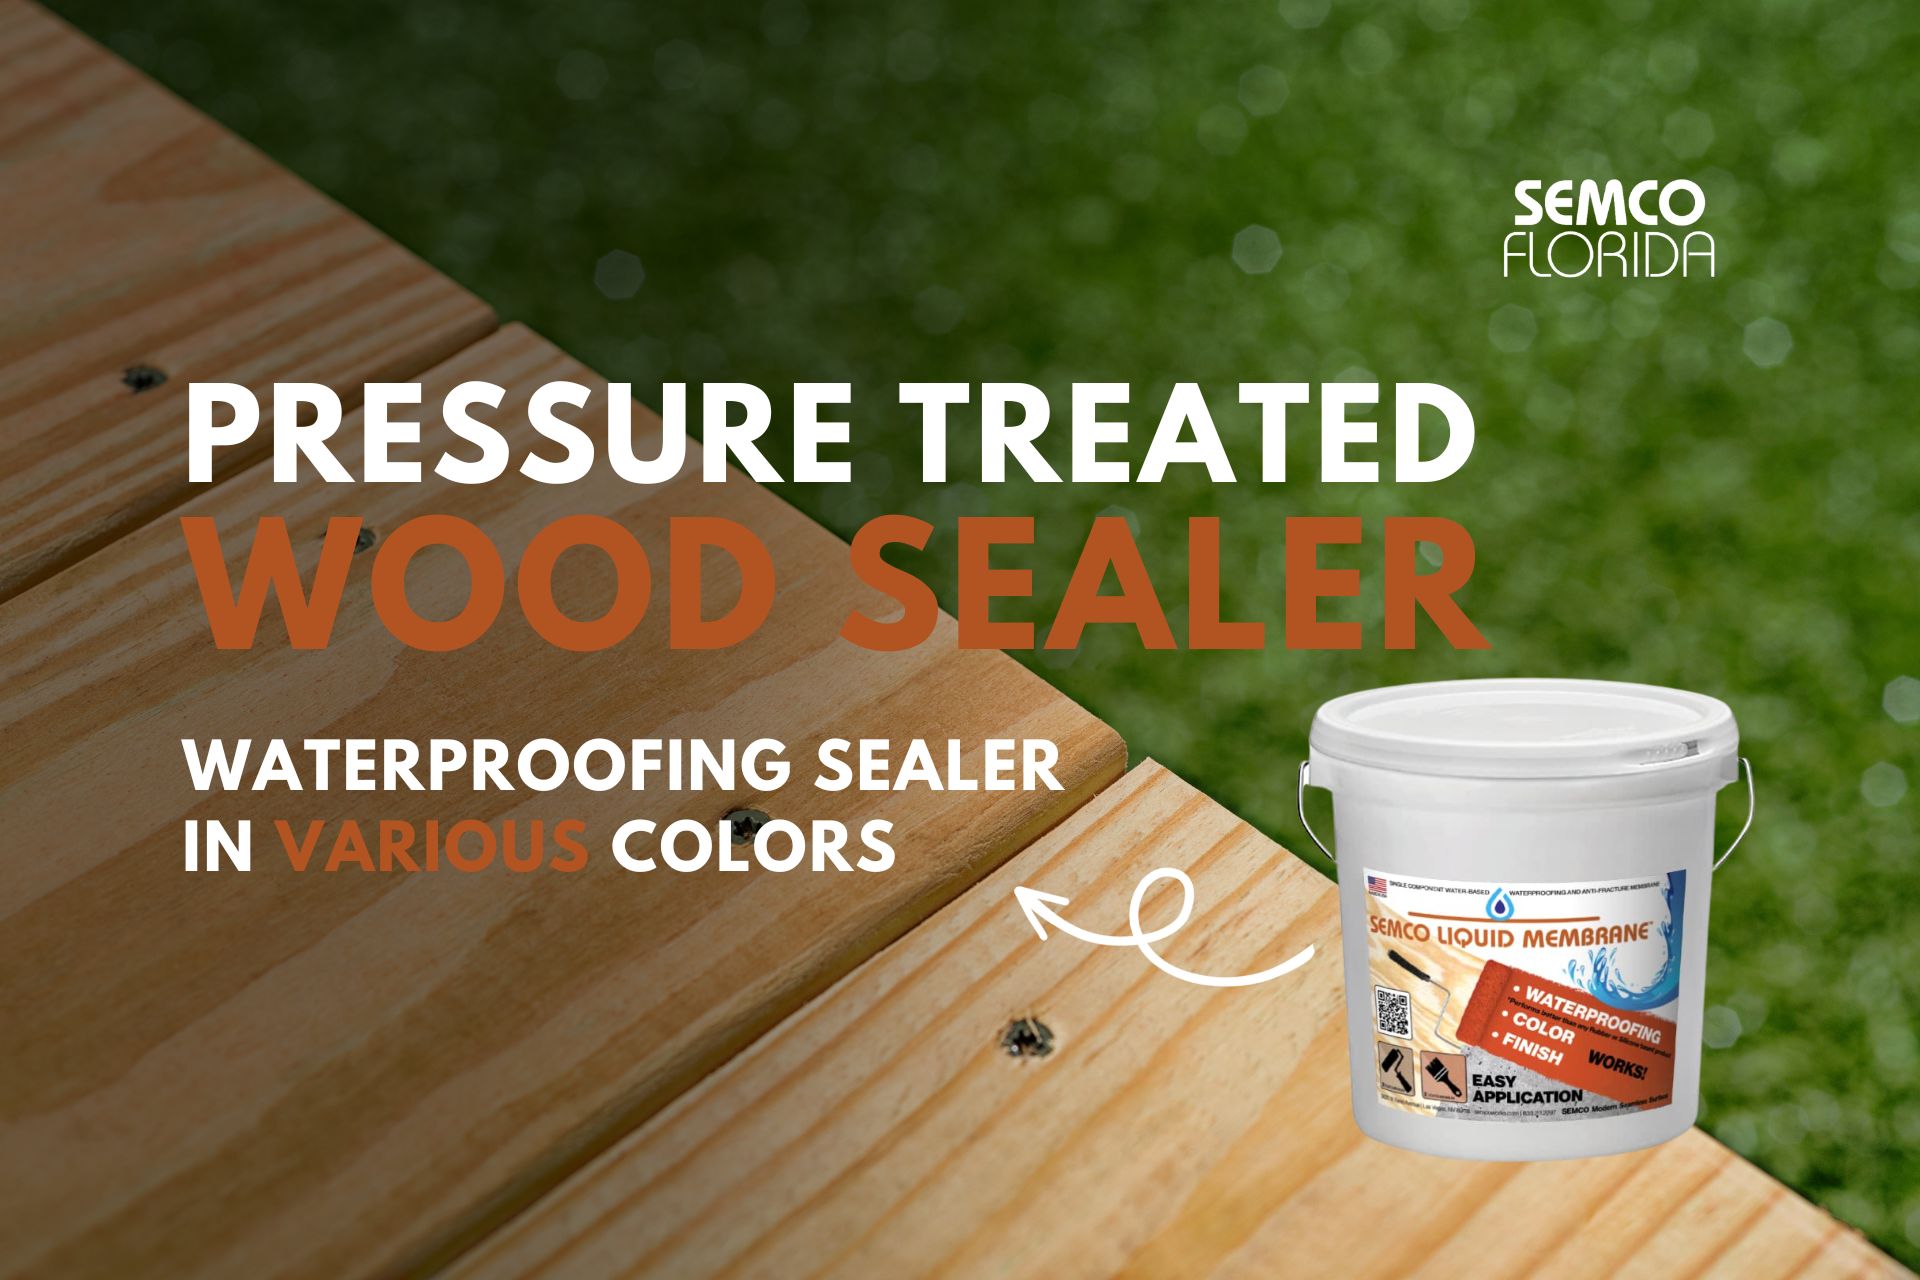 Best Waterproofing For Pressure Treated Wood, Our Top Recommendation